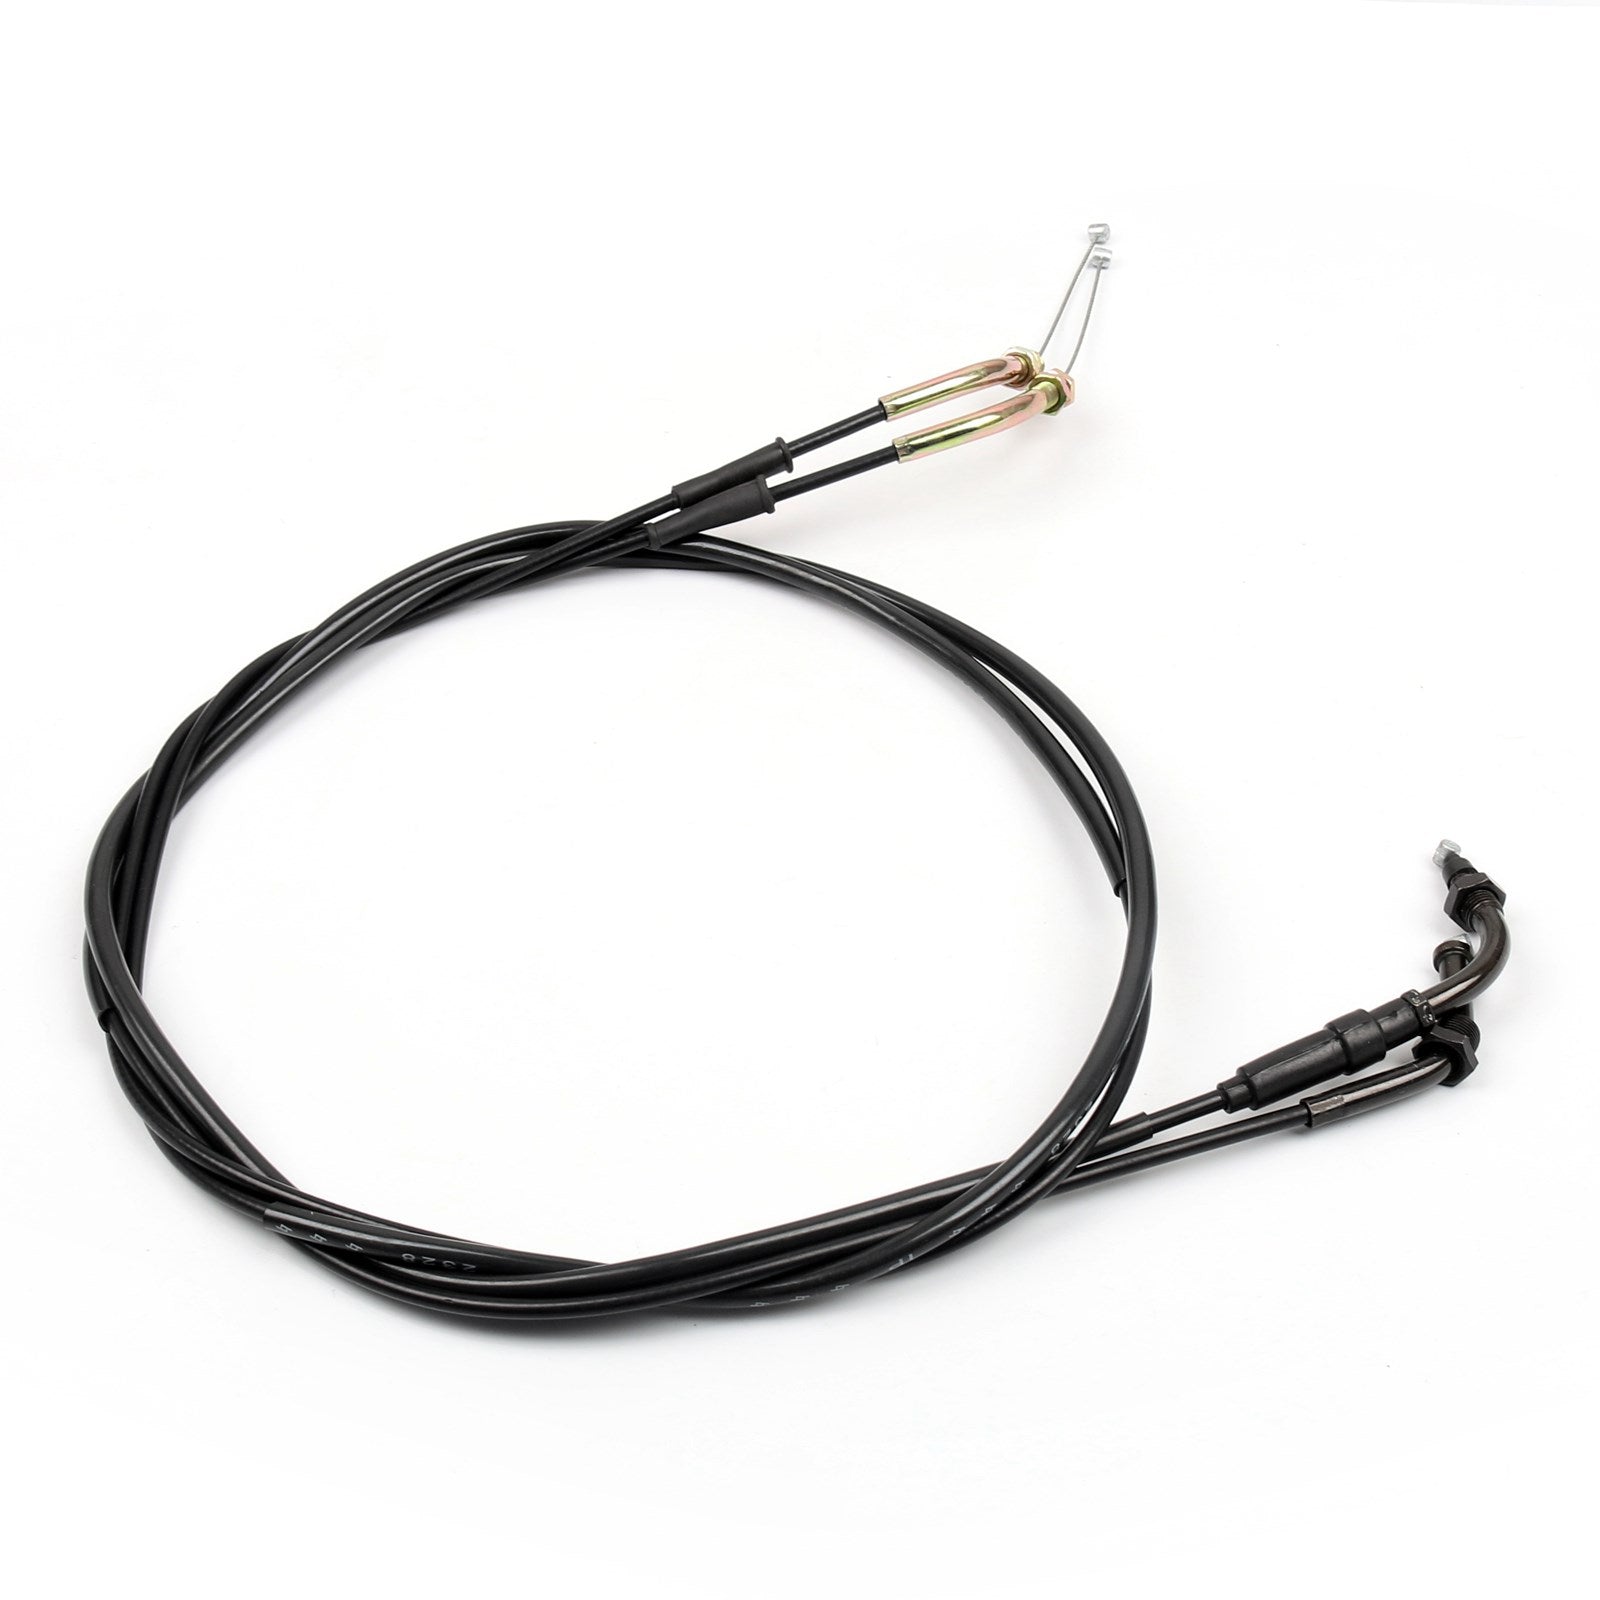 Throttle Cable For Honda CH250A CH250 ELITE 1989-1996 Black